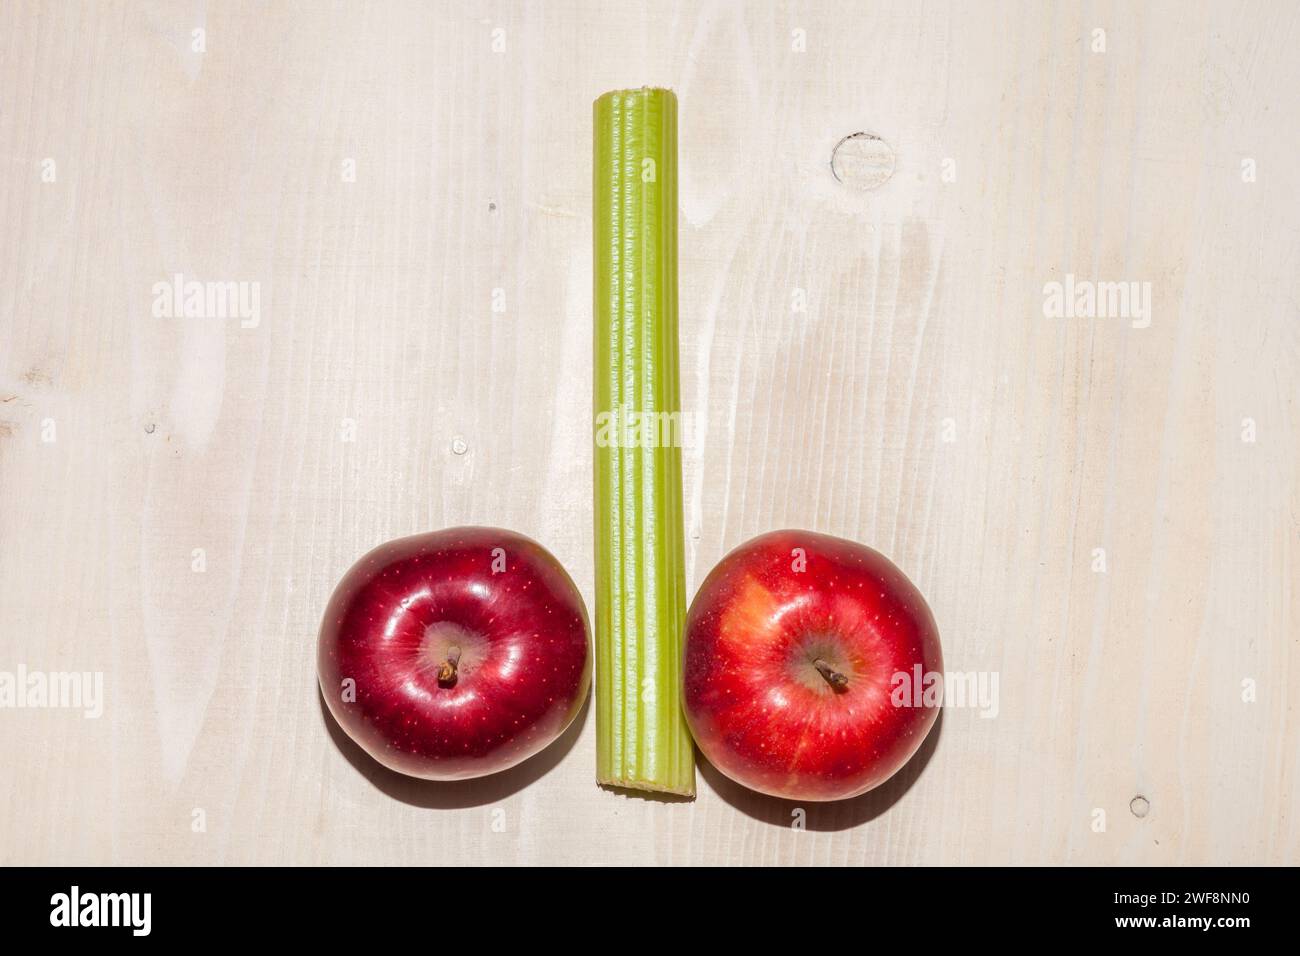 apples and celery arranged on wooden background Stock Photo